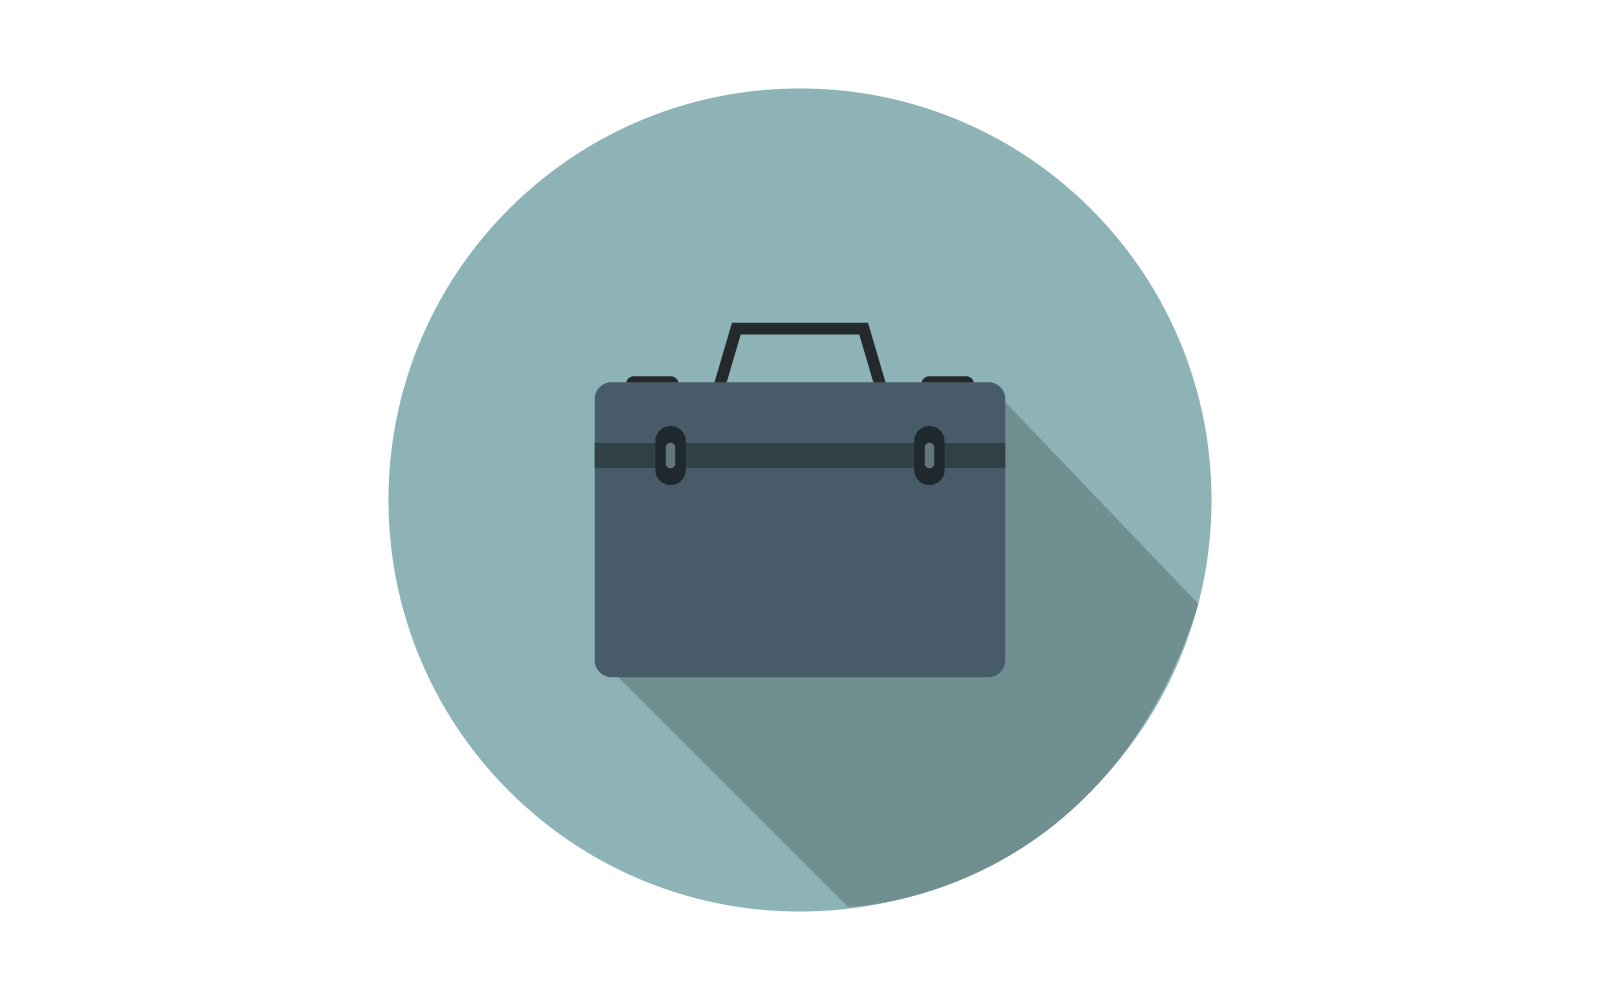 Work suitcase illustrated in vector on a white background